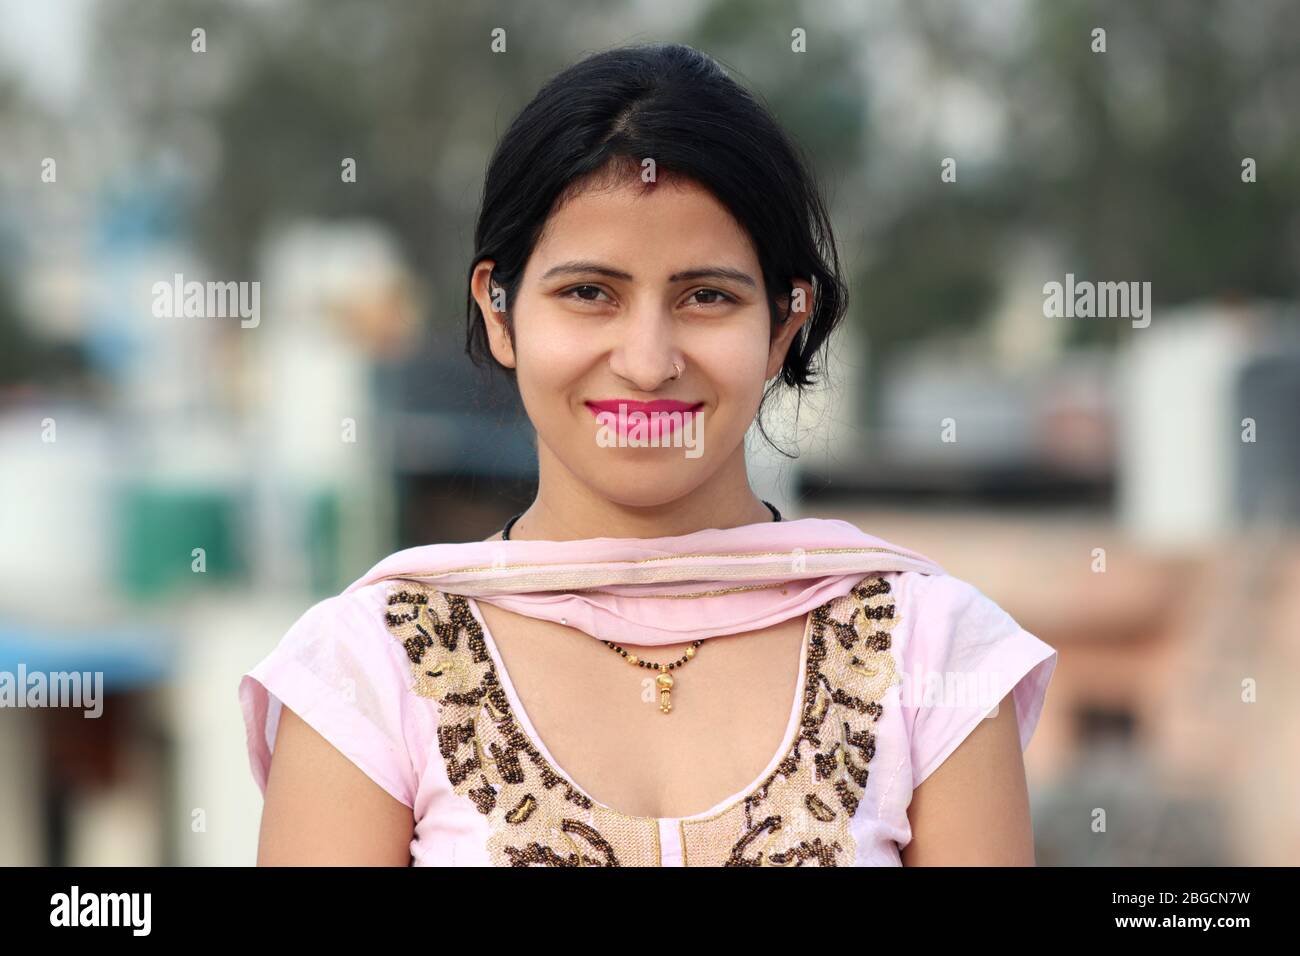 Close-Up face of smiling women Stock Photo